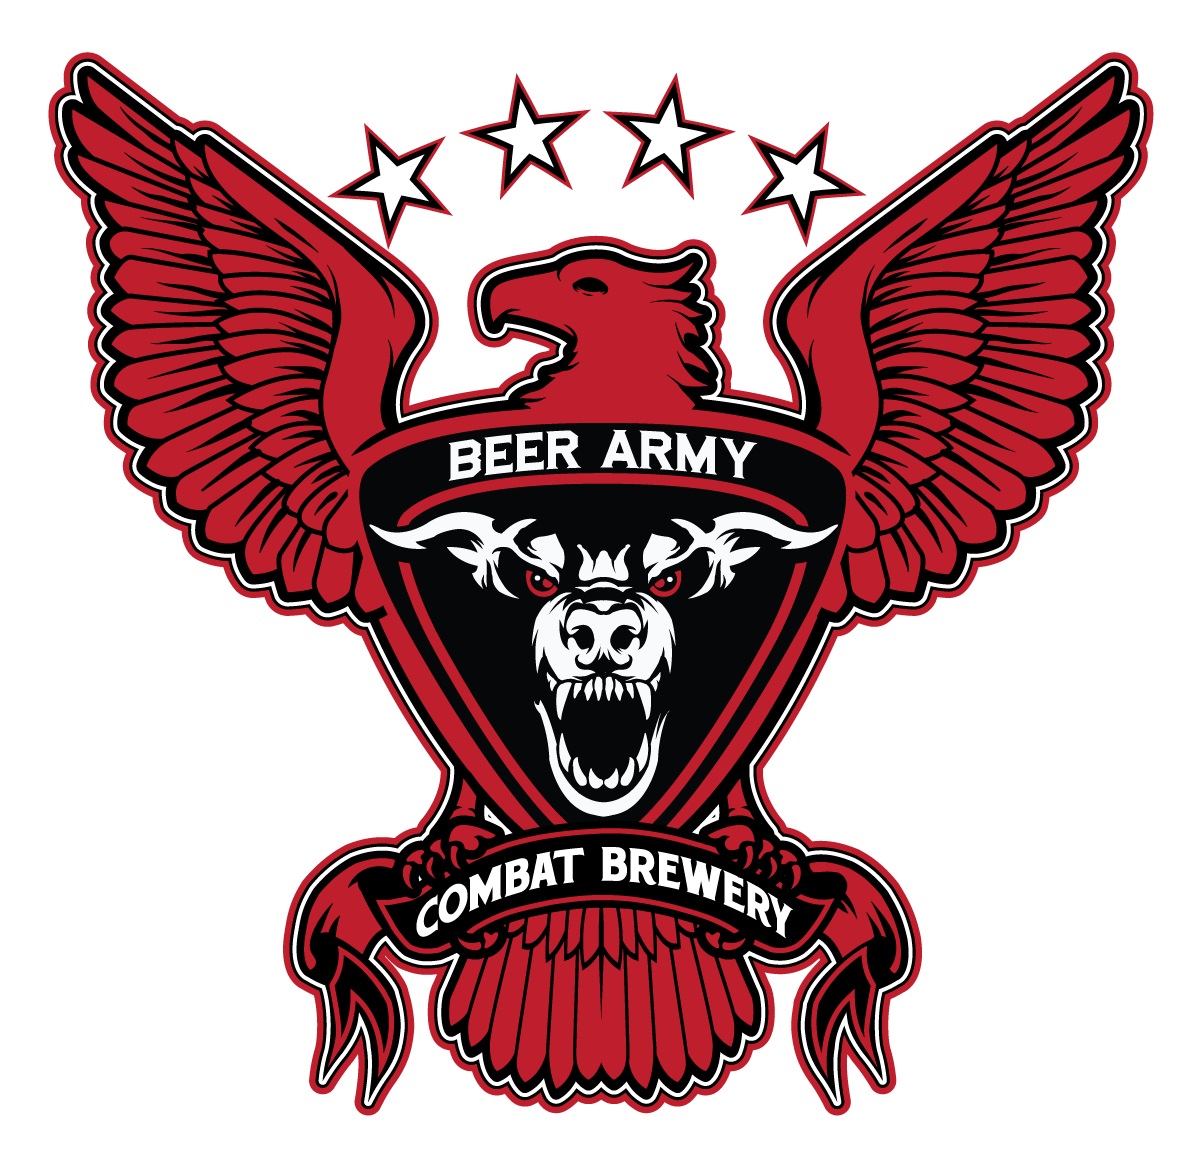 Beer Army Combat Brewery jobs